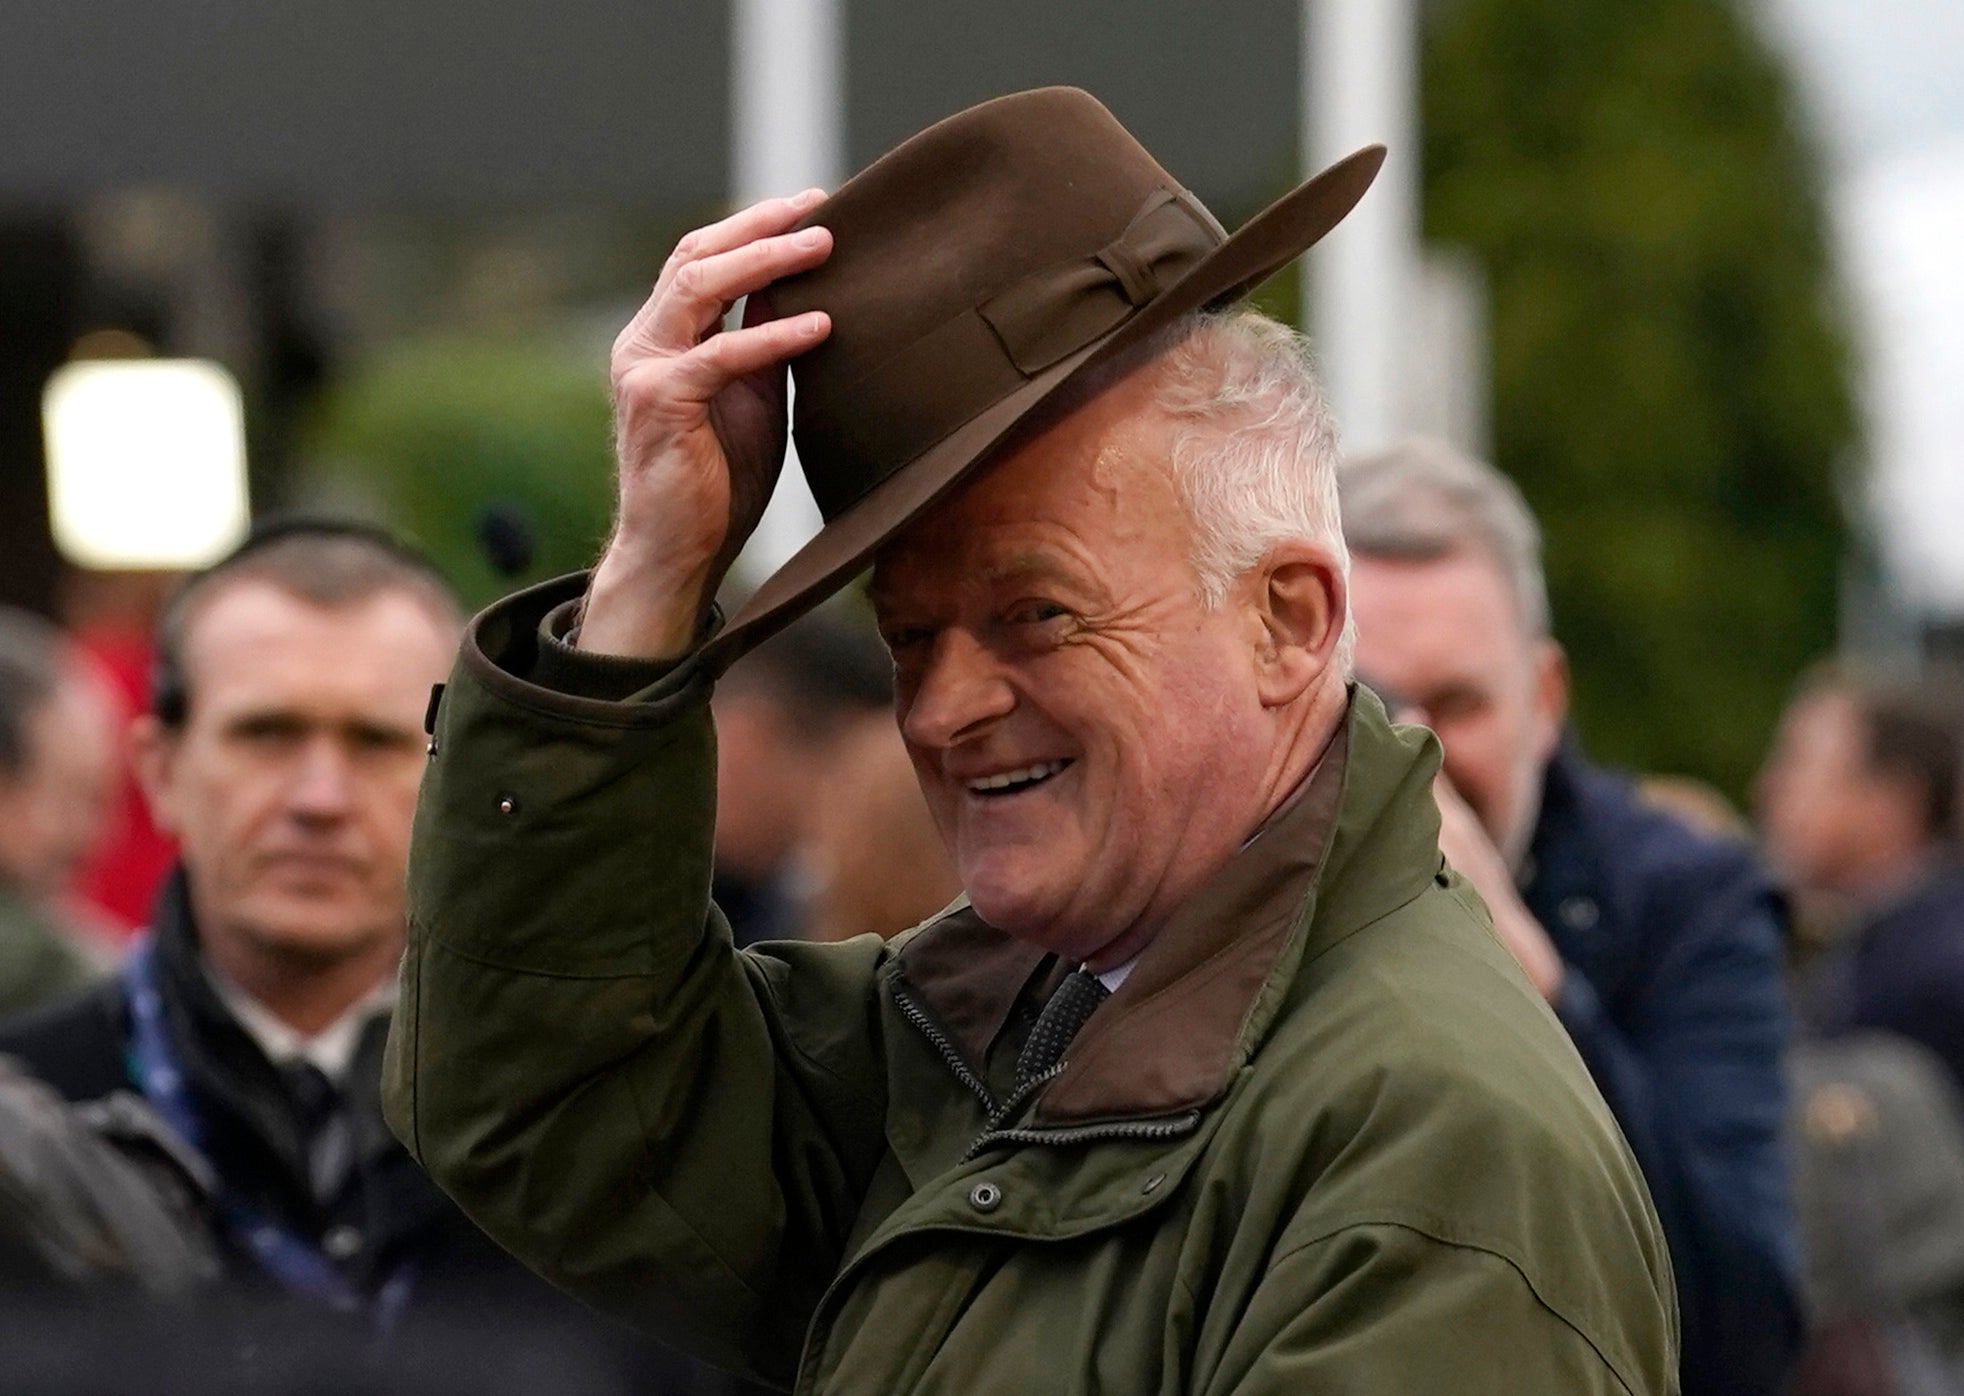 Willie Mullins celebrates his 100th winner after son Patrick won the Champion Bumper